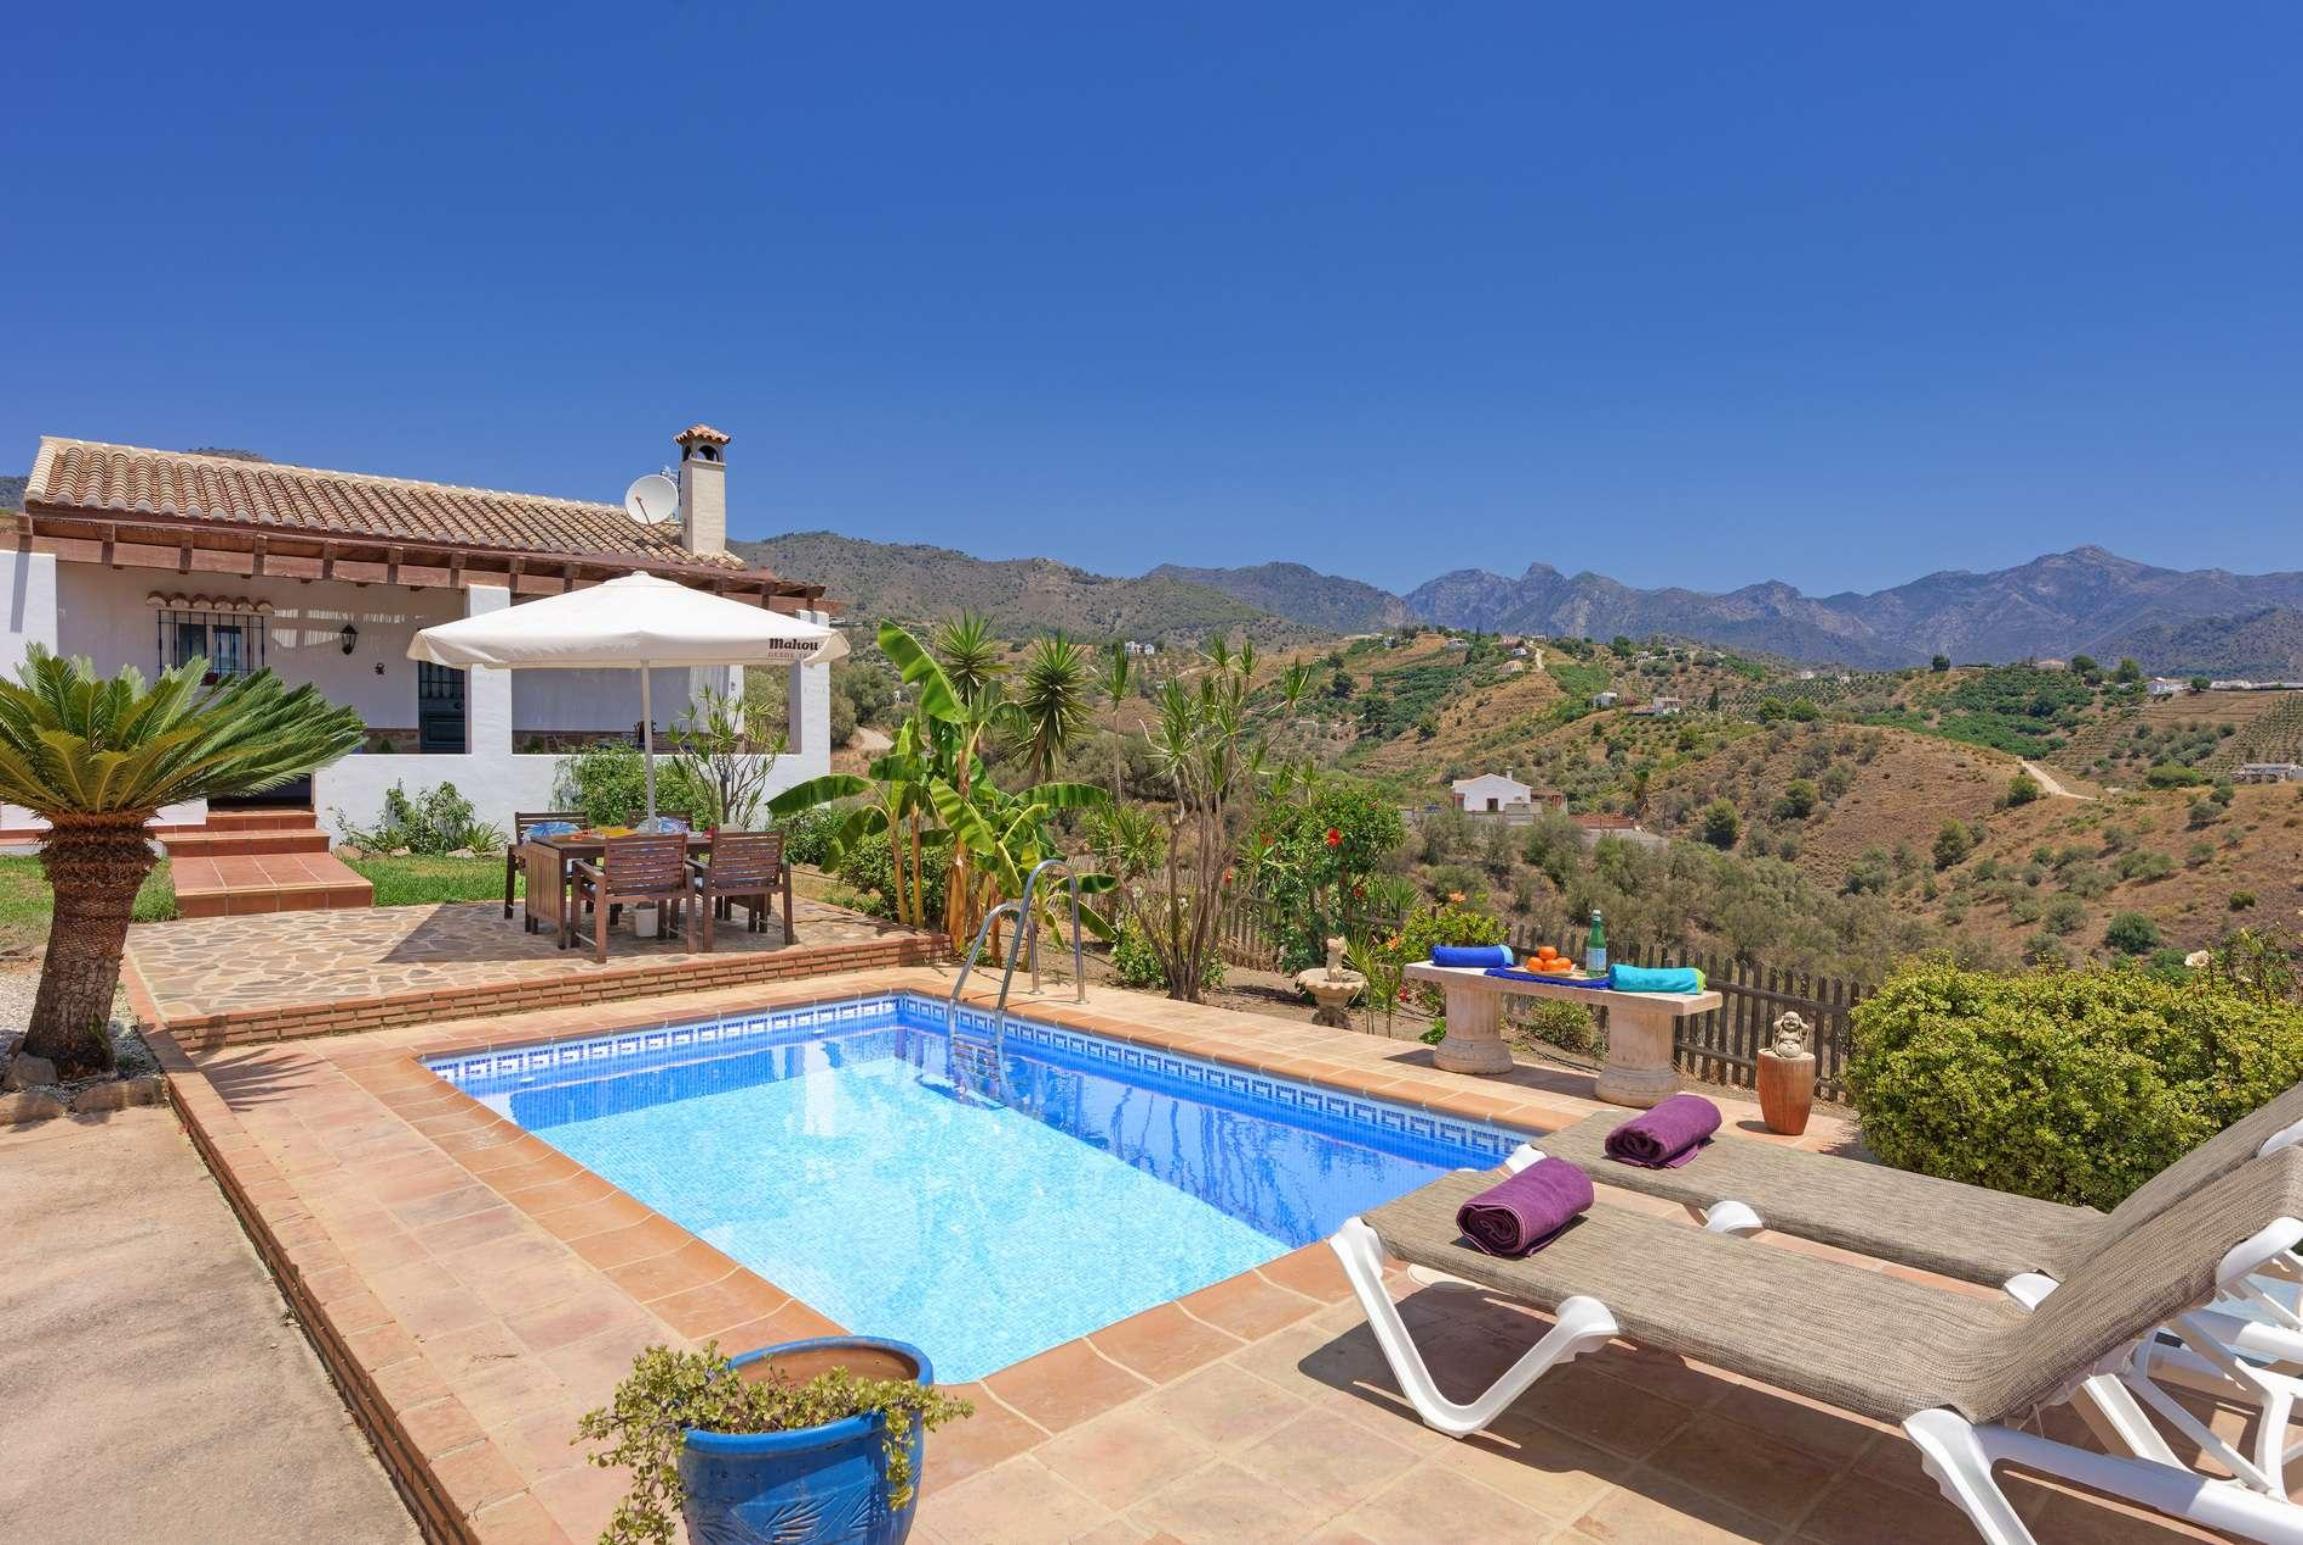 Property Image 1 - Traditional Spanish villa in a beautiful location